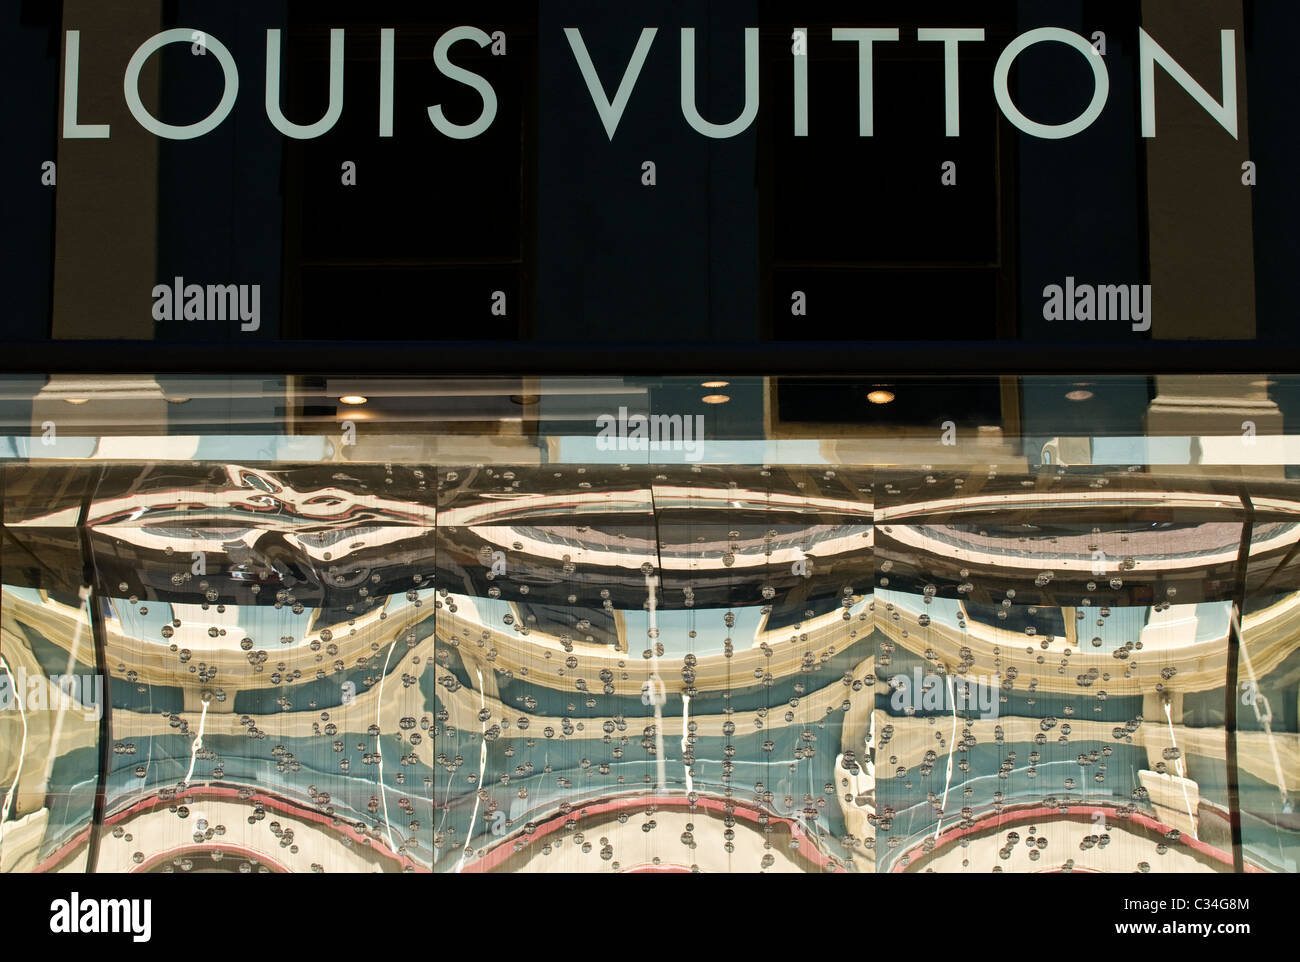 Louis Vuitton Store Sign. Chic Fashion Wall Art. Metal LV Designer Sign –  Print and Proper®